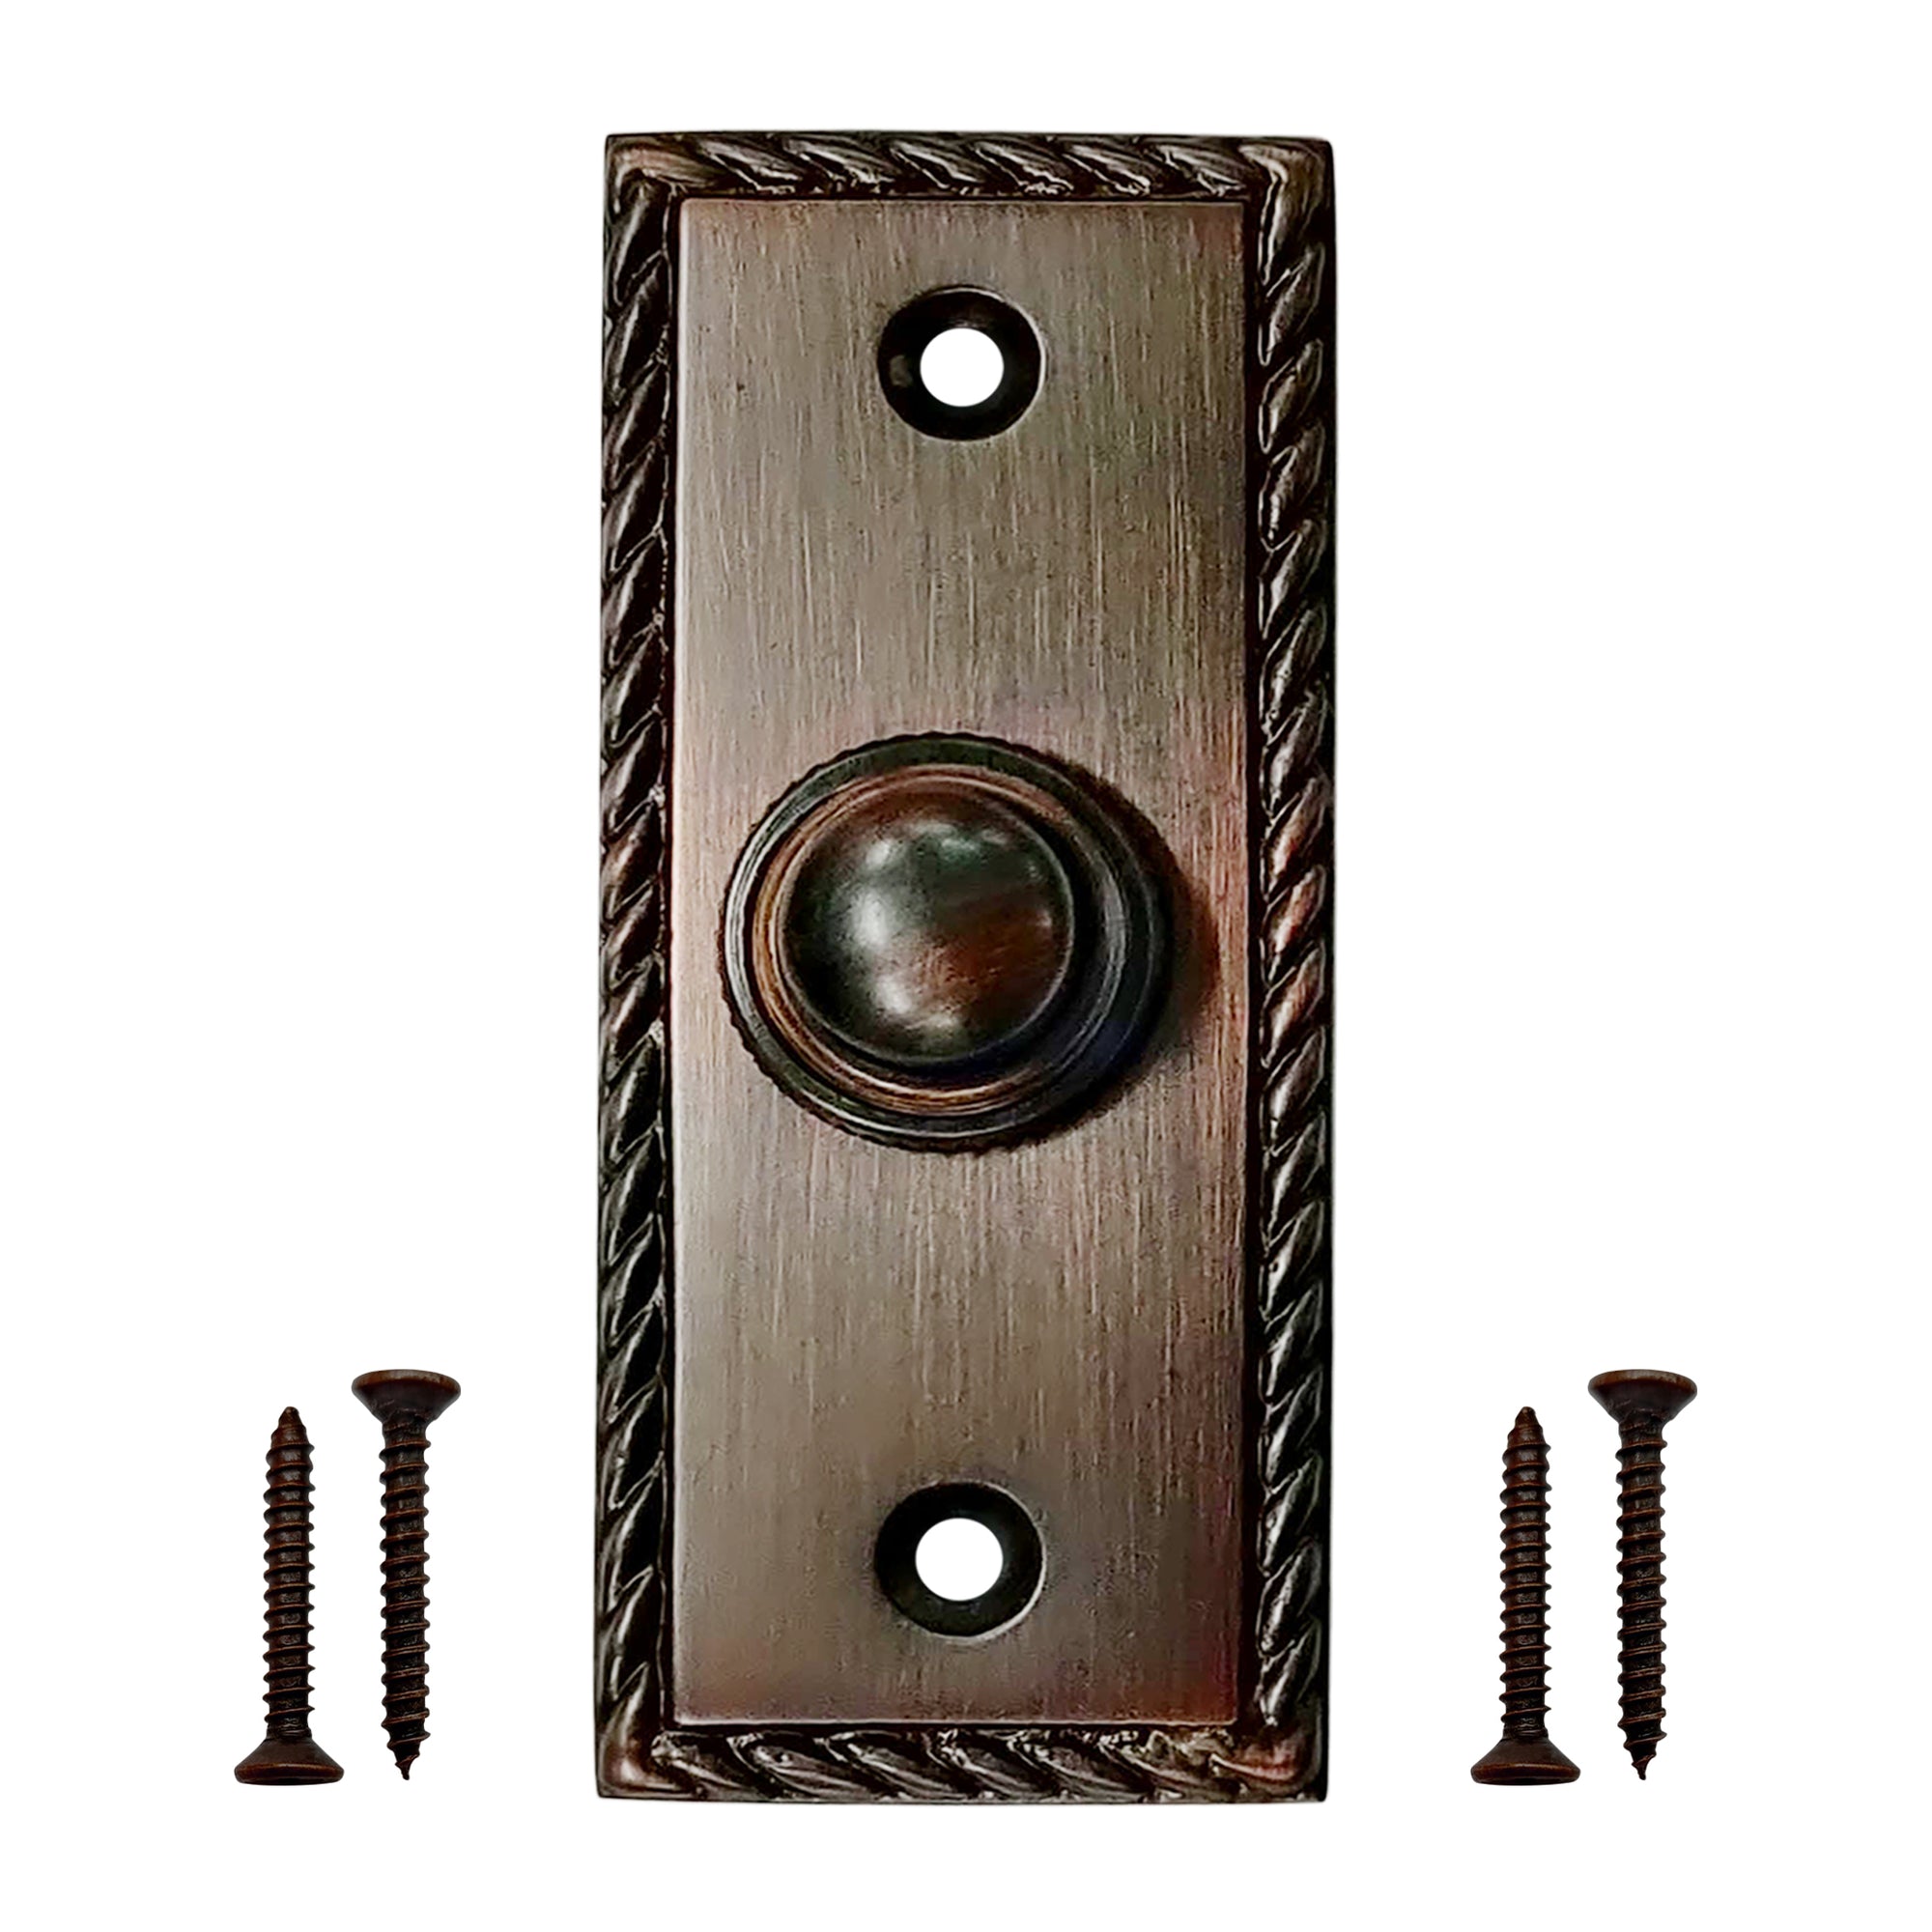 Decorative Doorbell Button – Finest Quality Bell Push Button – Easy to Install Calling Bell Button – Oil Rubbed Bronze